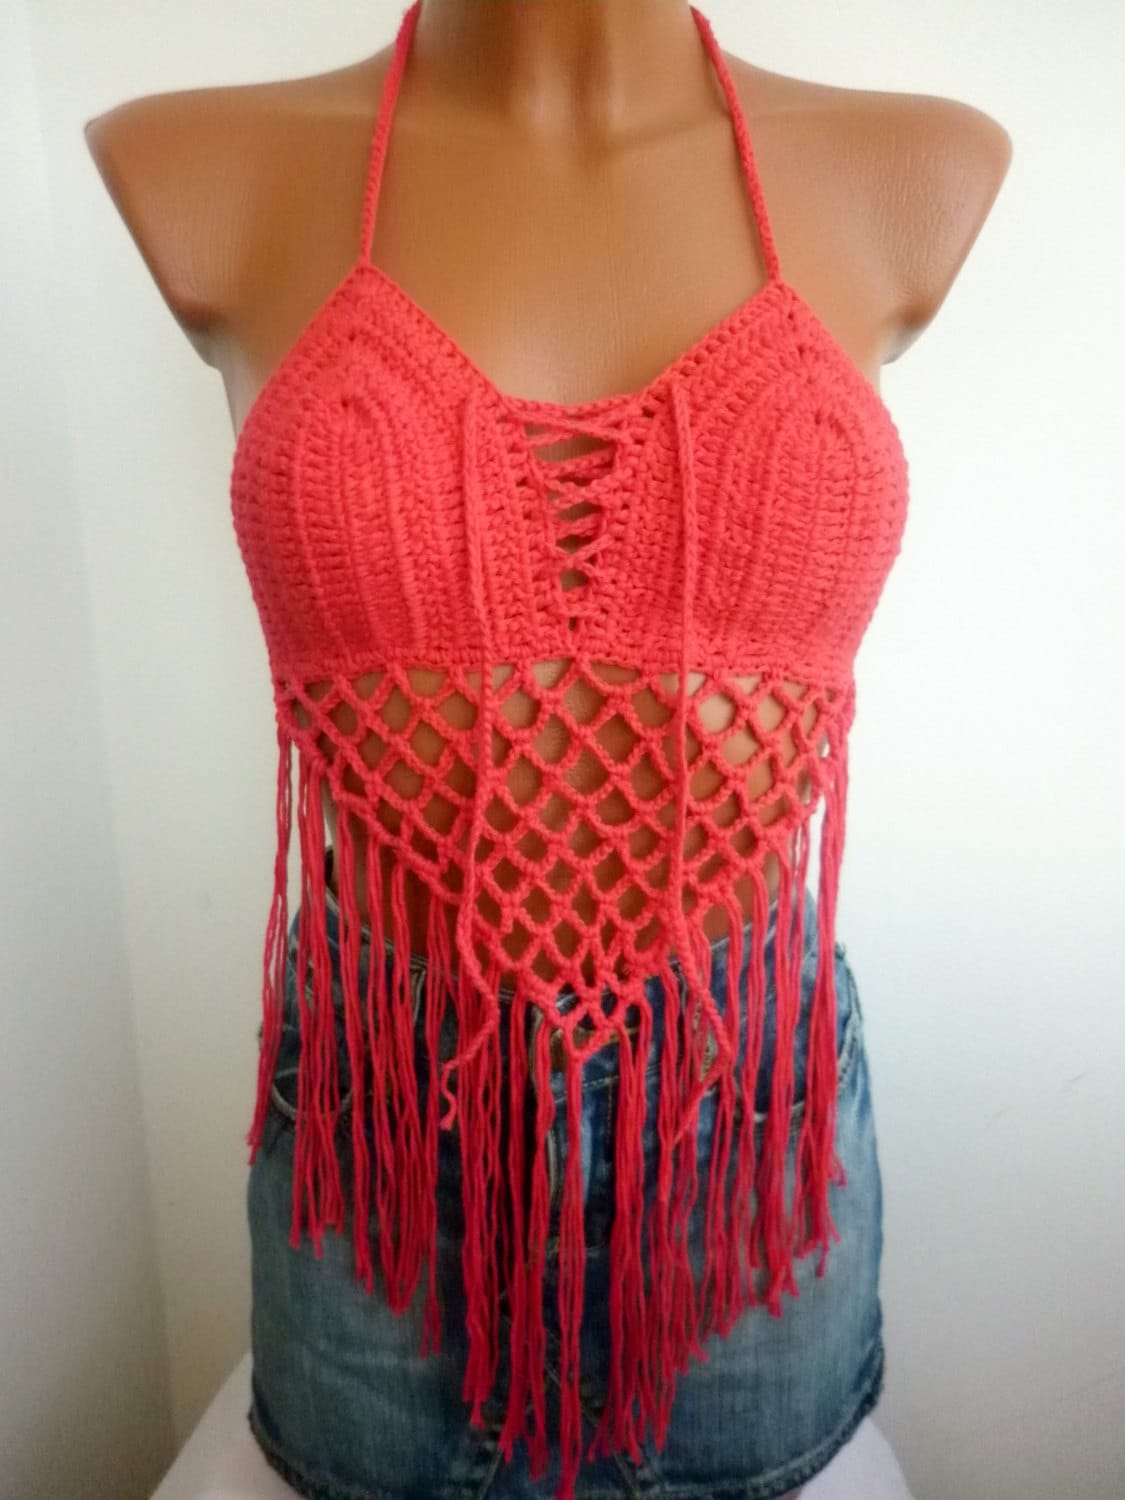 Crochet top Blue toddler crop top Beach clothing for child Open back baby toddler top Hippie 